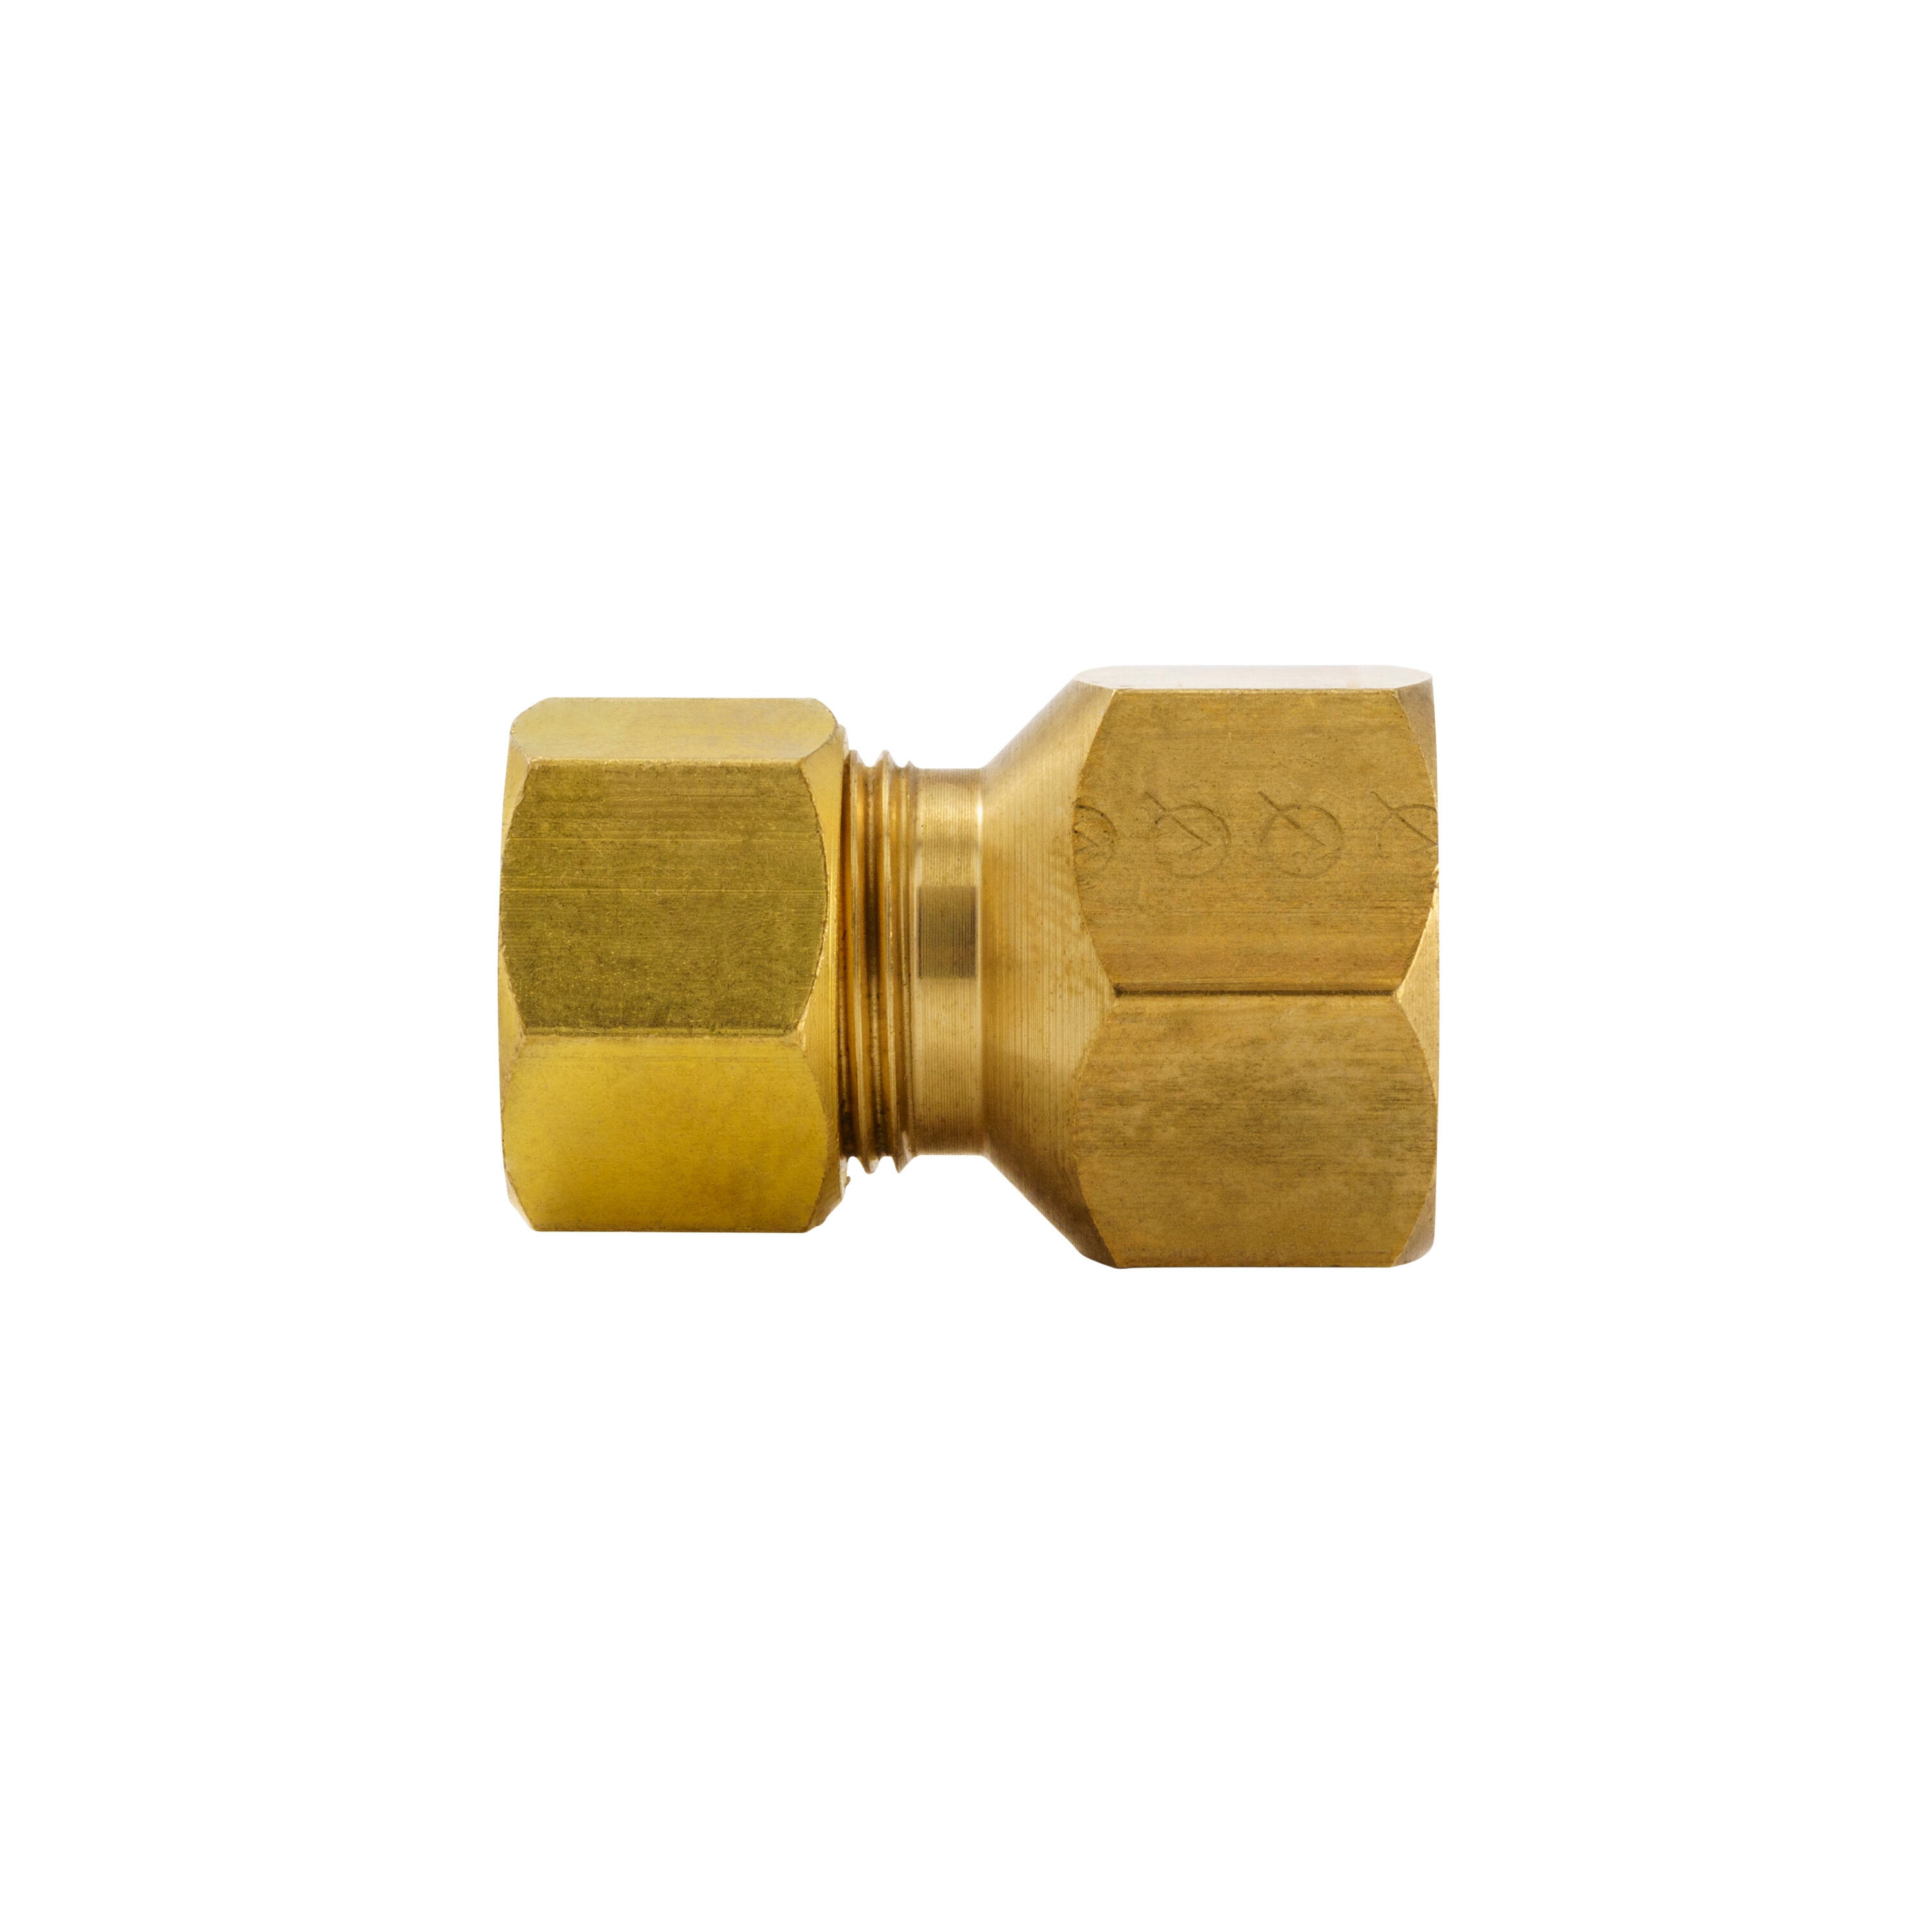 Adapter Compression Brass Fittings at